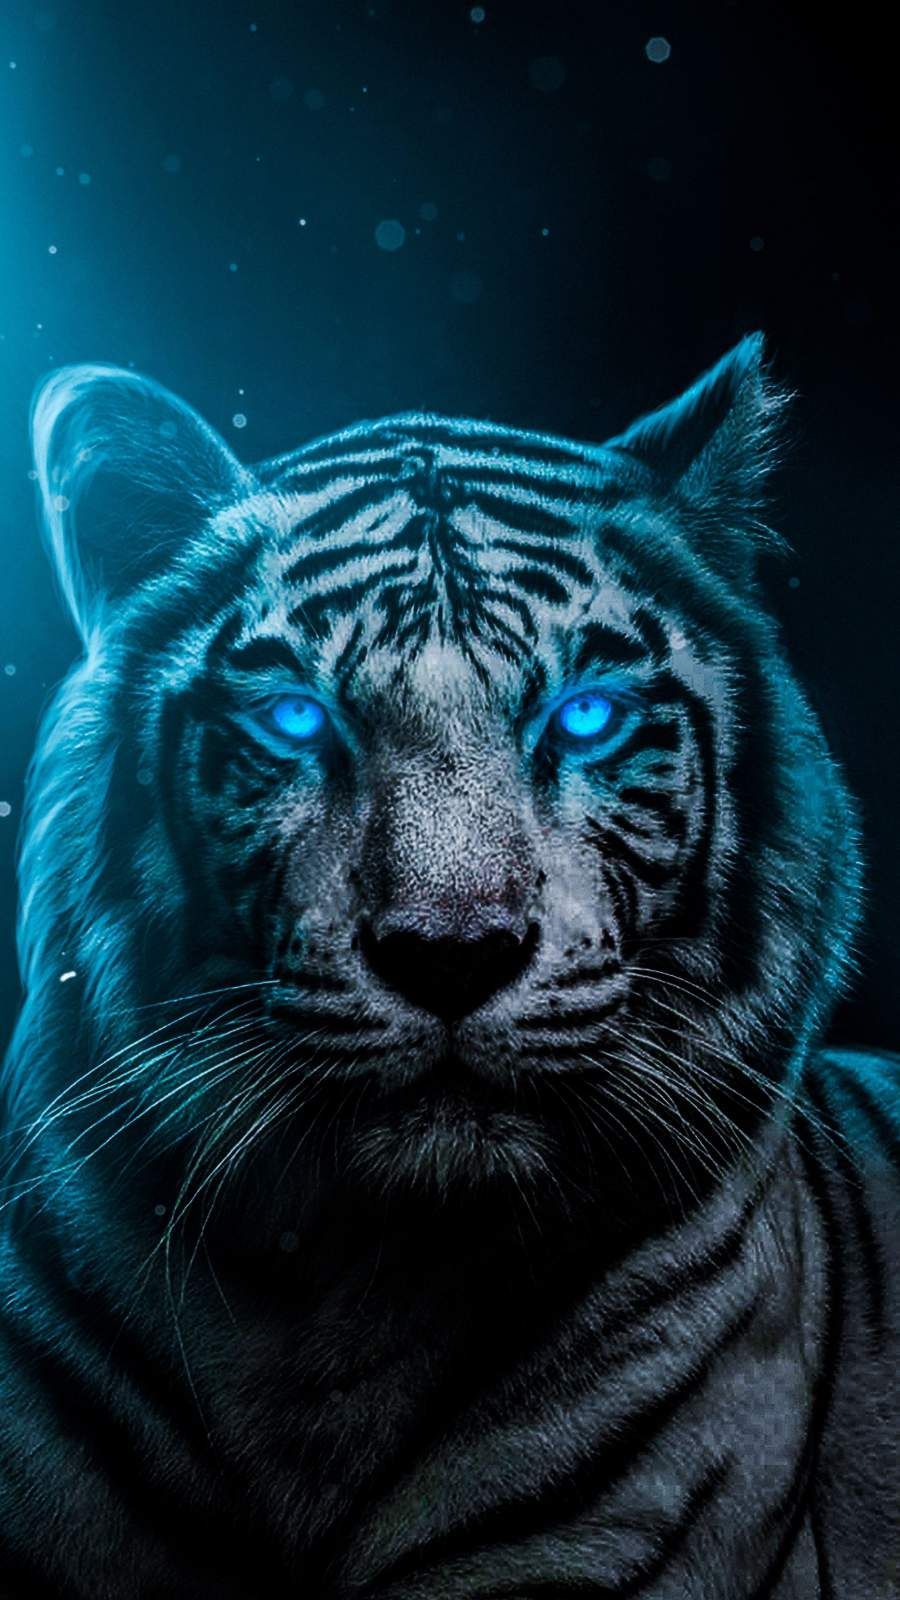 Cool Tigers Wallpapers Wallpapers